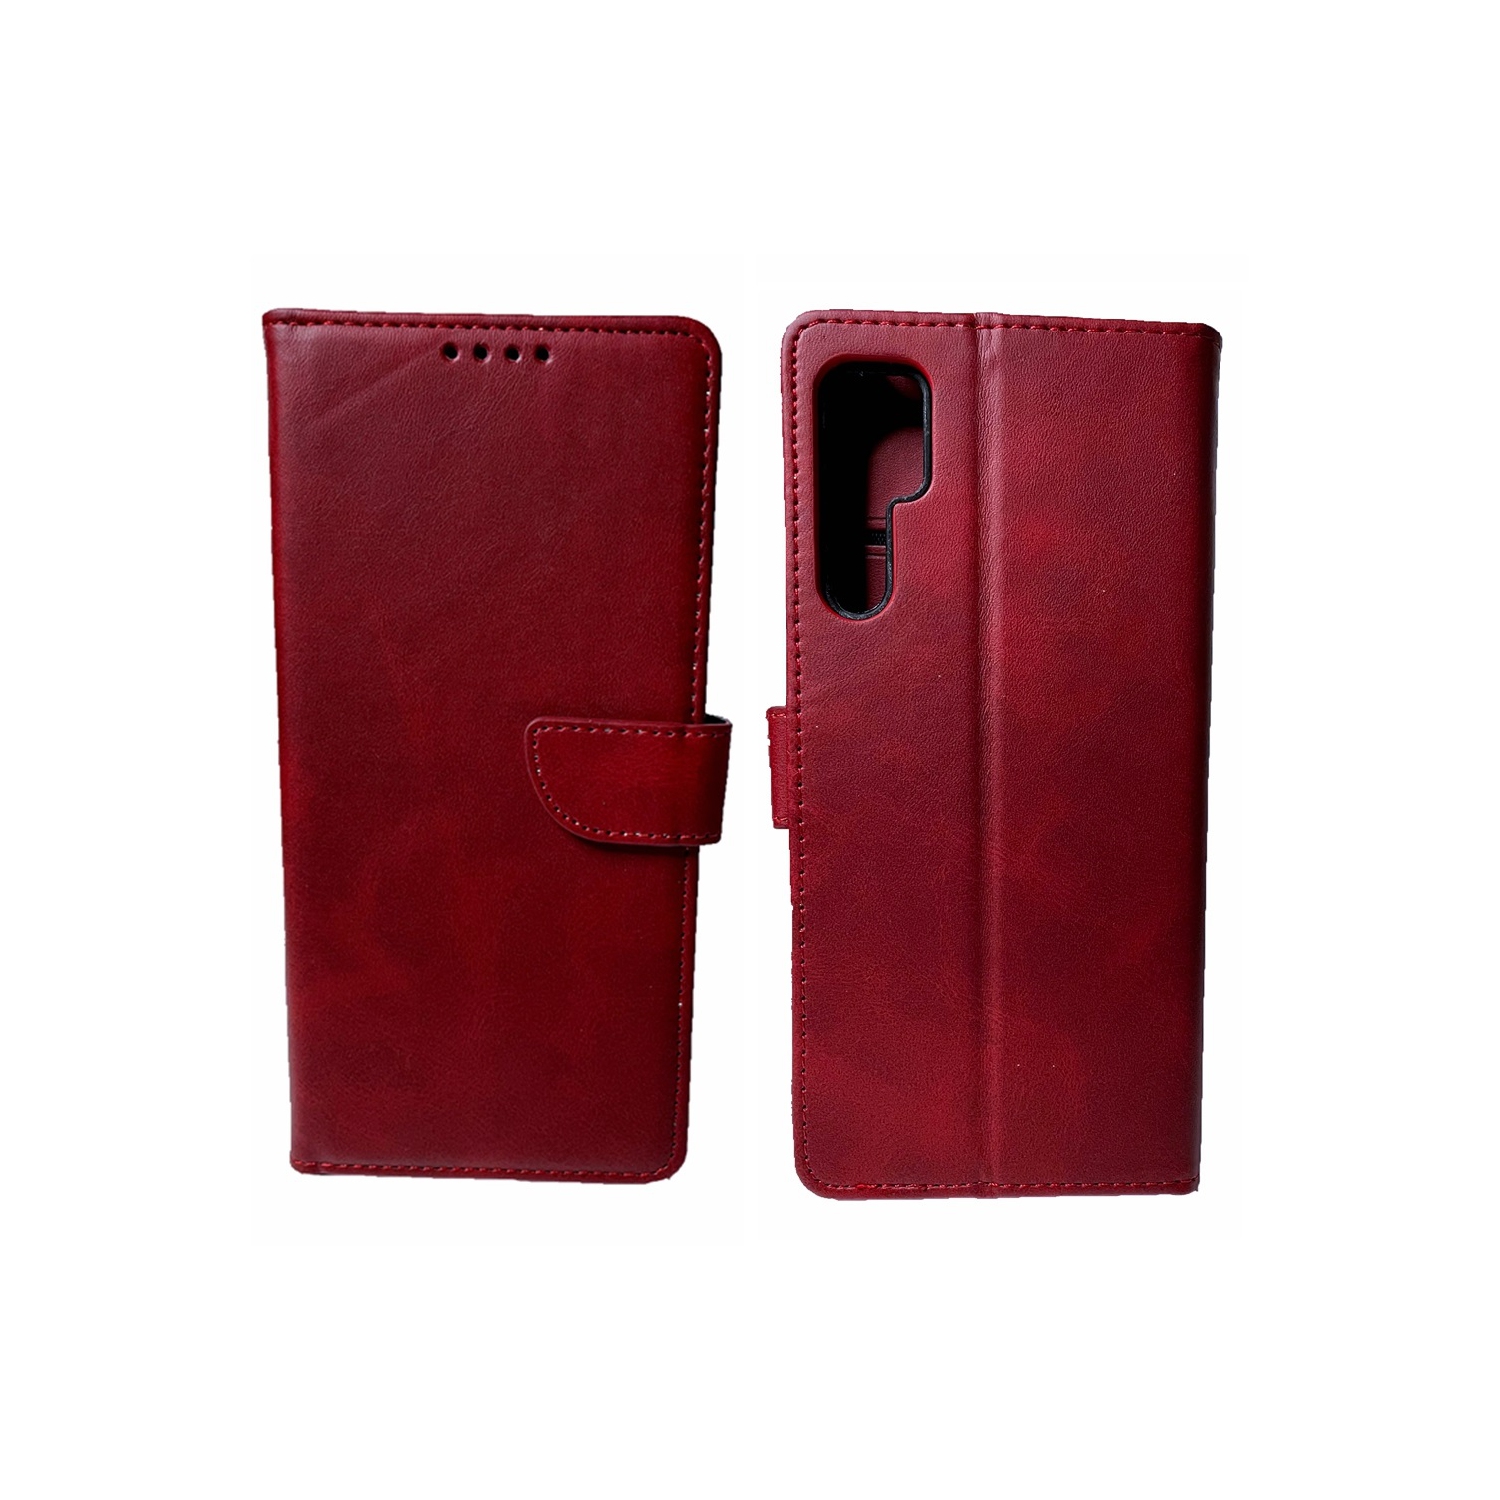 TopSave Leather Folio Flip Wallet w/Magnetic Clip Card Slot Holder Case For TCL 20 Pro, Burgundy